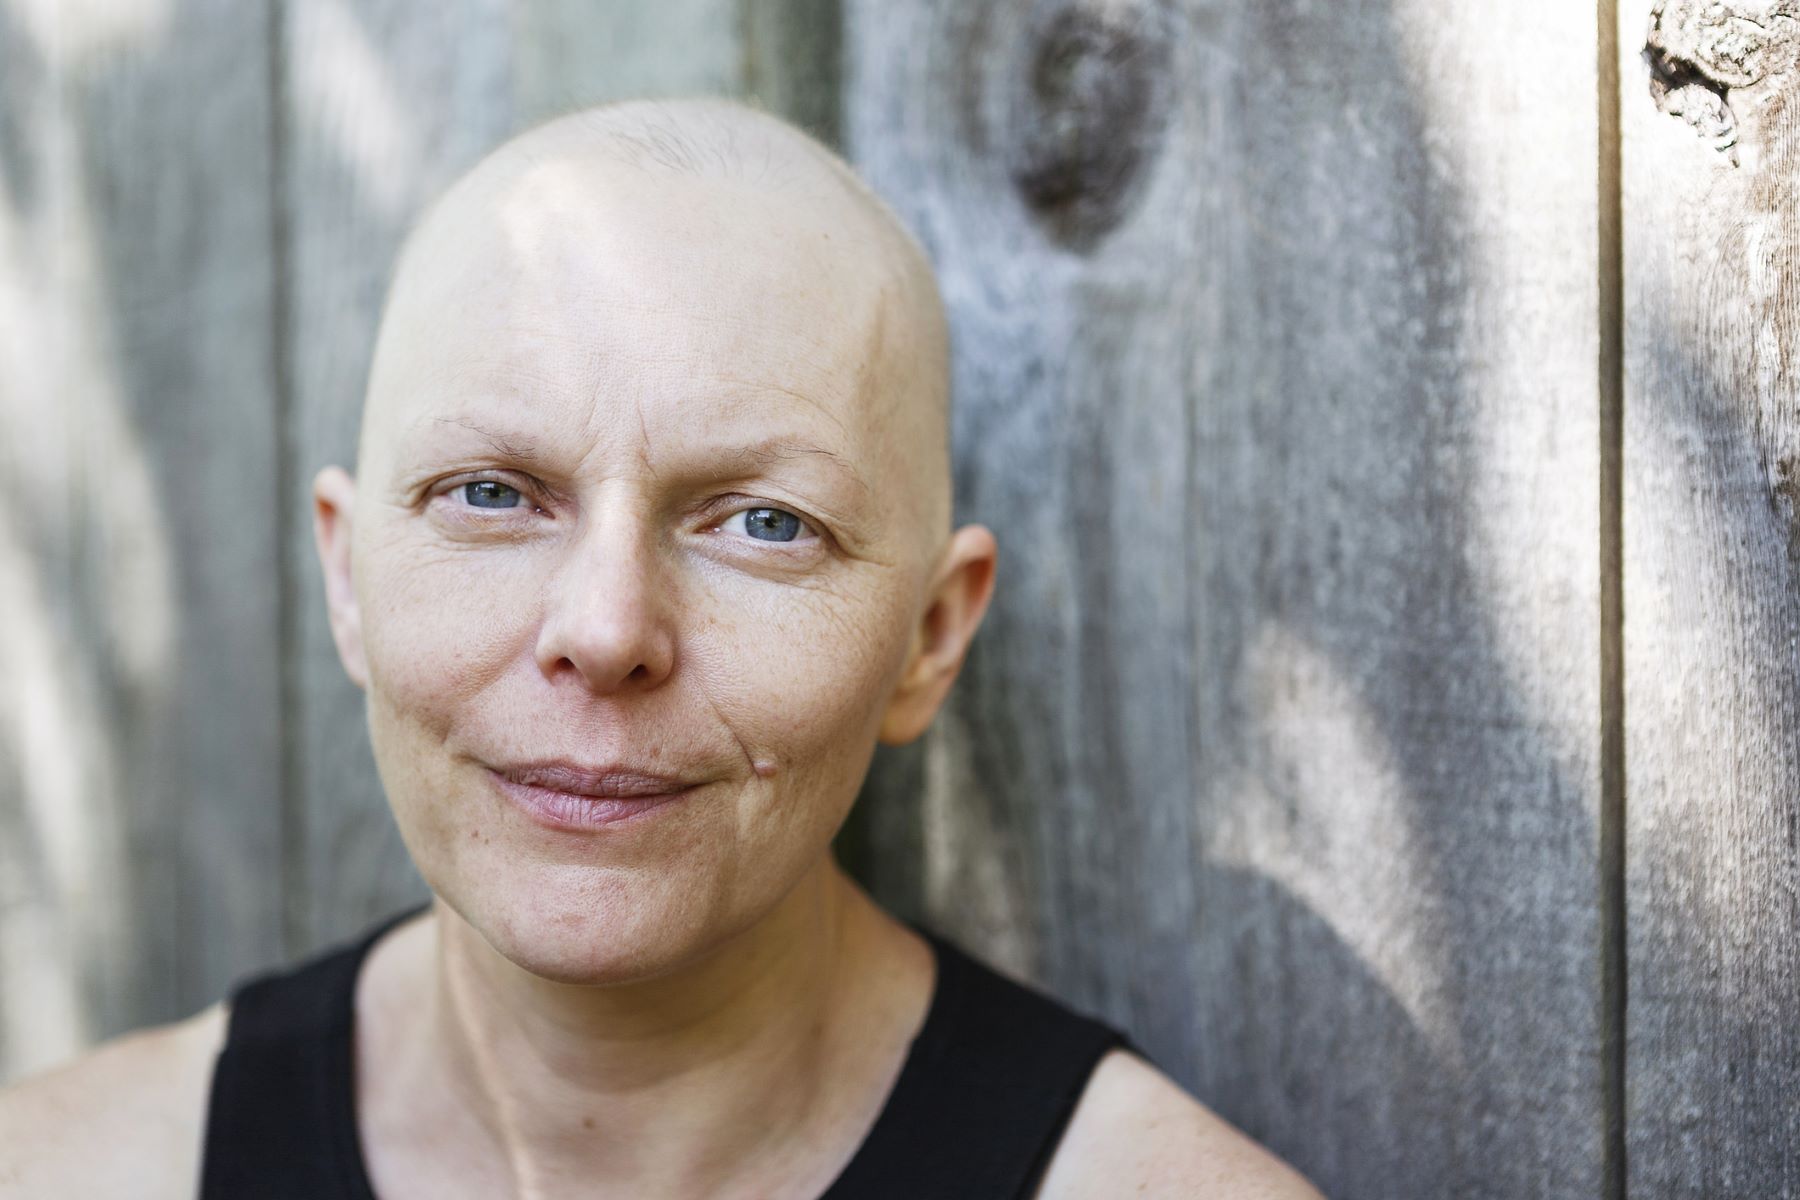 Woman with eyebrow loss from chemotherapy